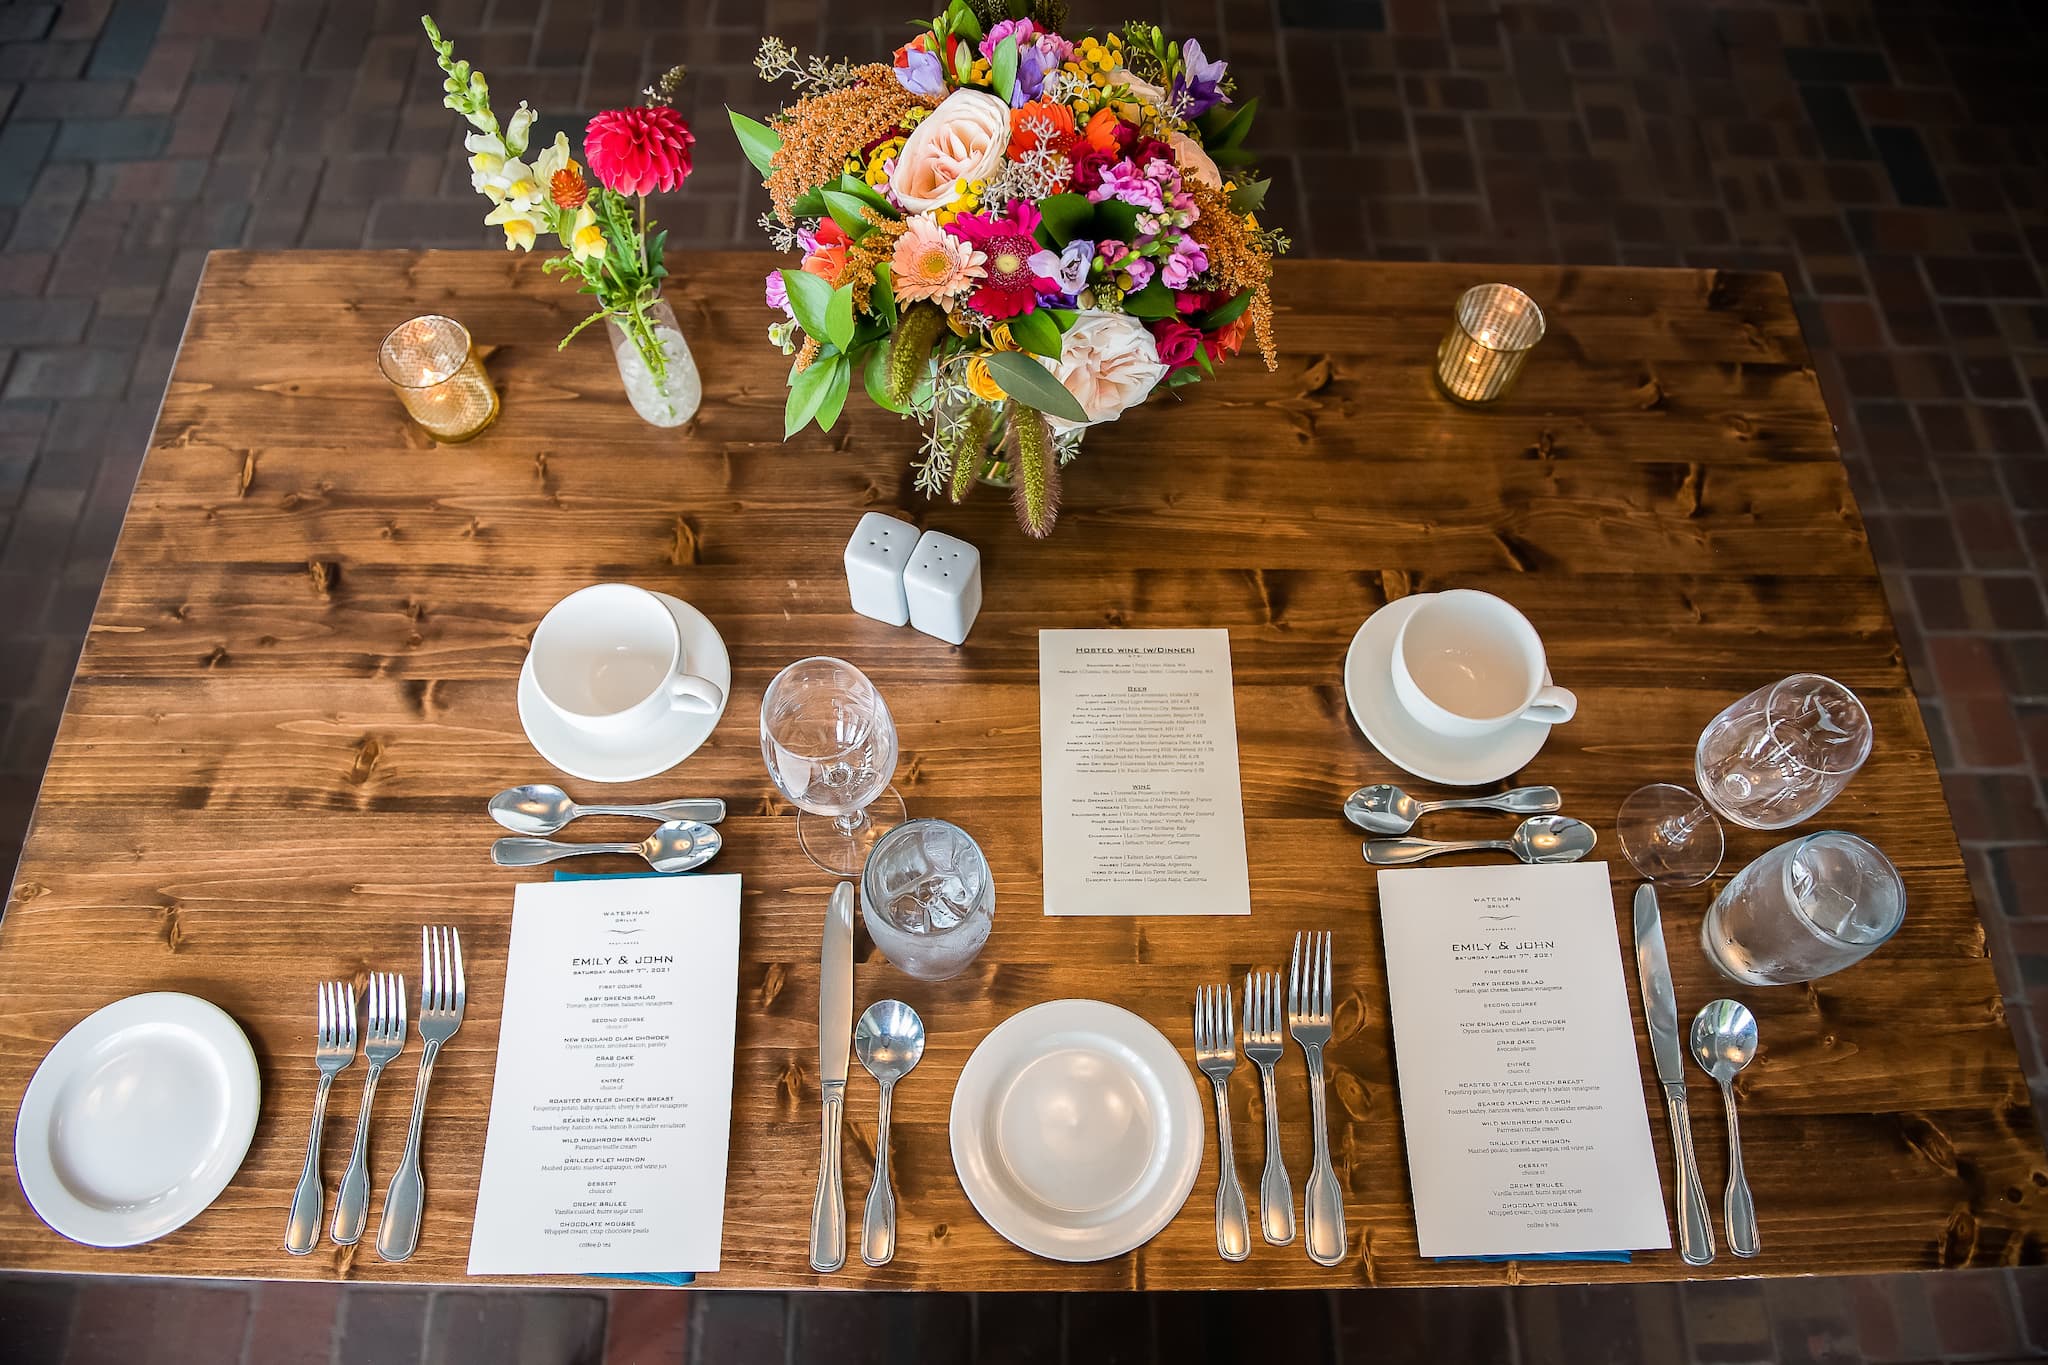 A Blissful Wedding Experience at Waterman Grille, Providence Rhode Island